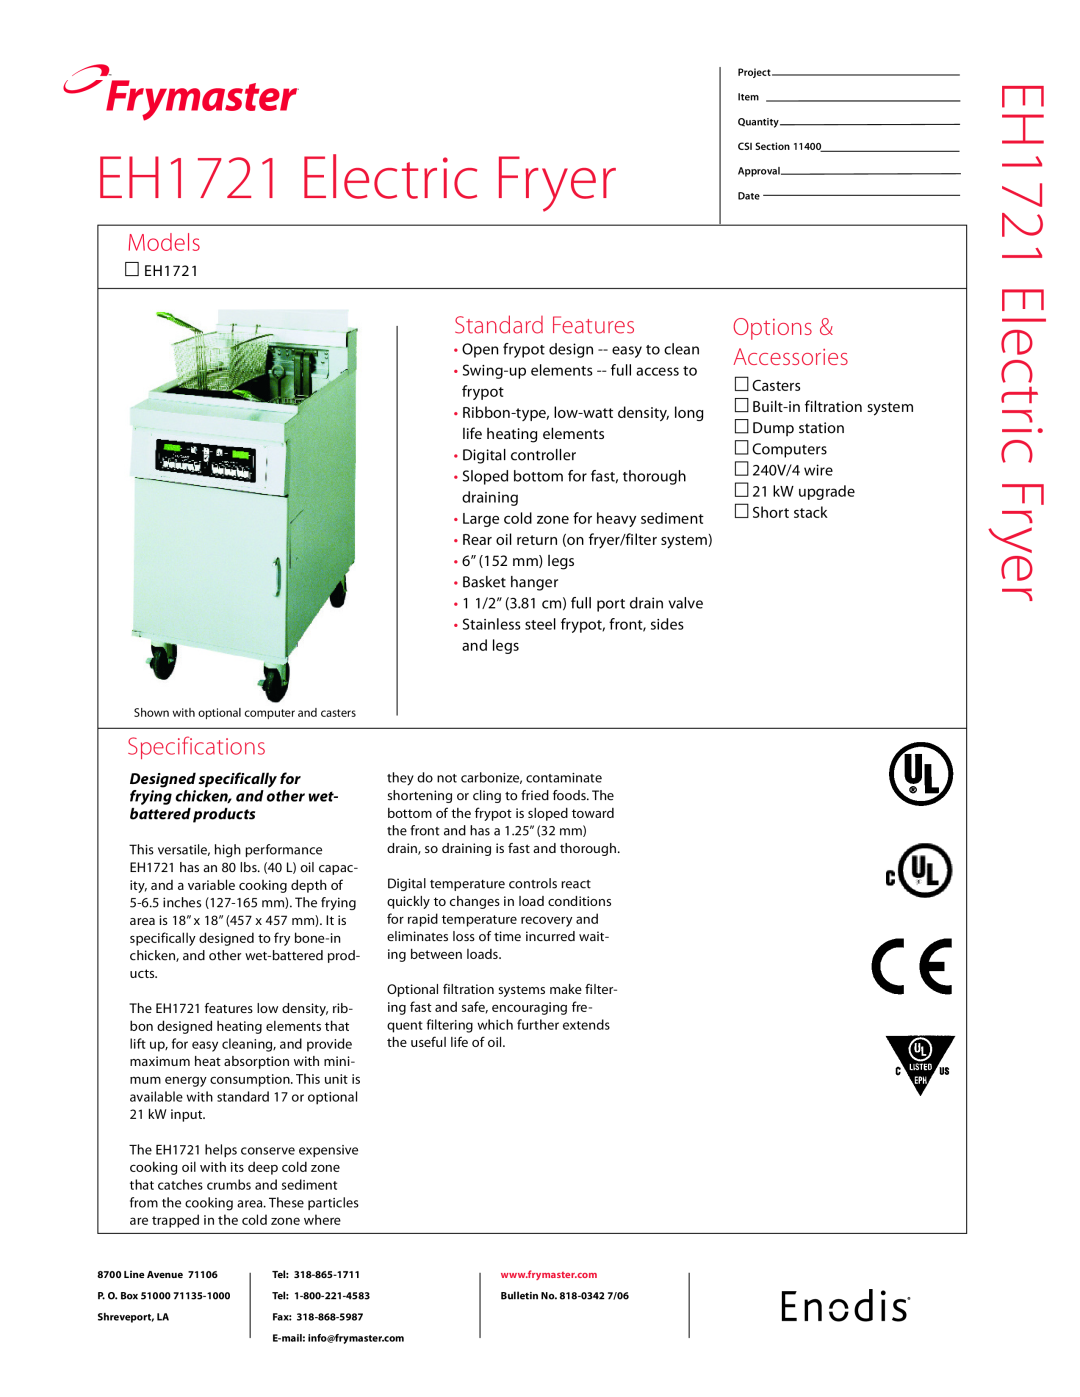 Frymaster specifications EH1721 Electric Fryer, Frymaster, Models, Standard Features, Options, Accessories 